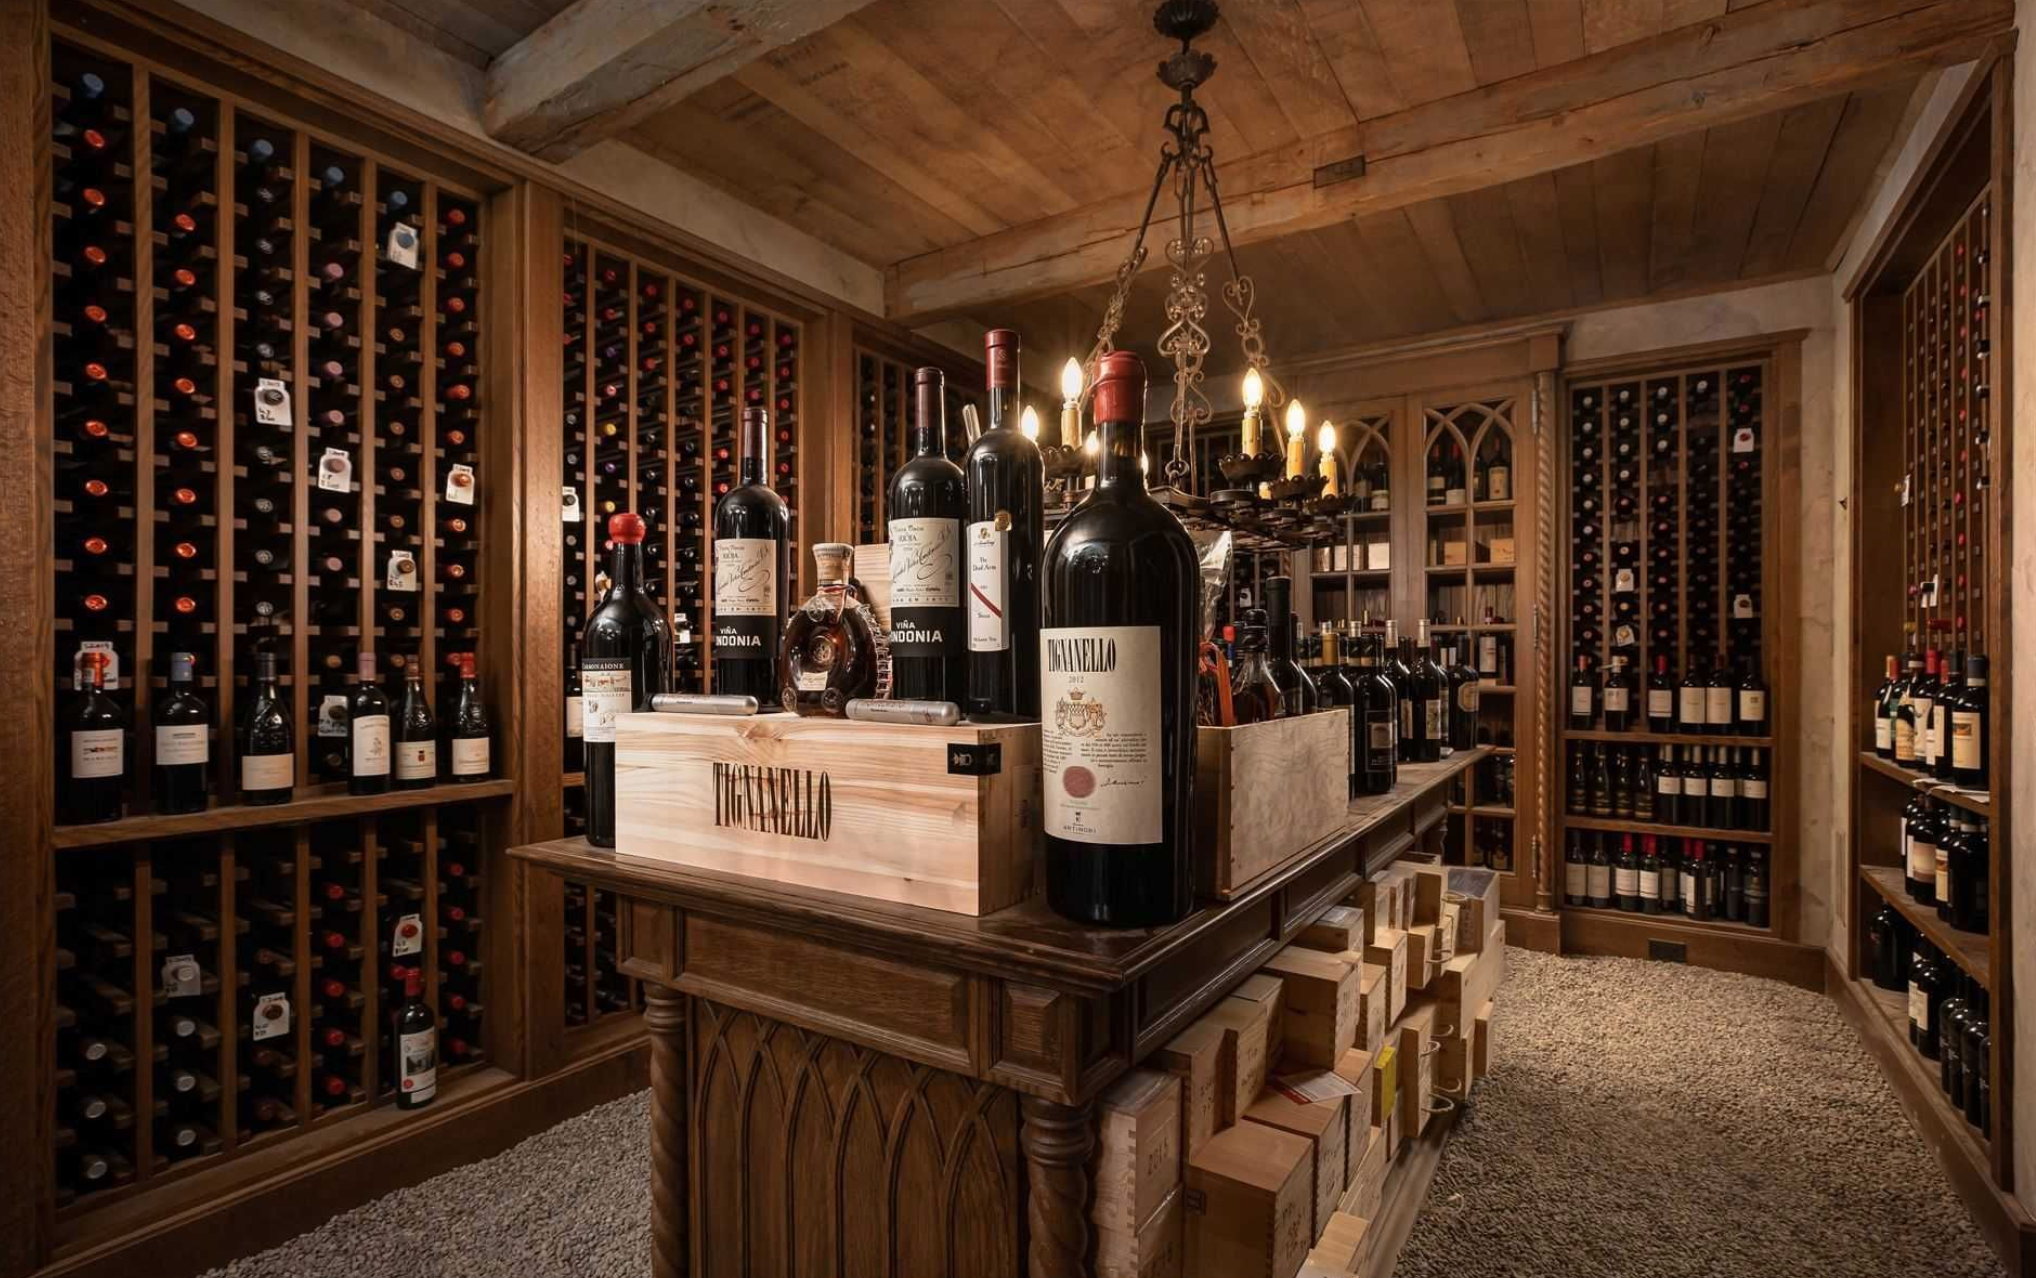 The wine cellar holds 400 bottles and is lined with pea gravel. 